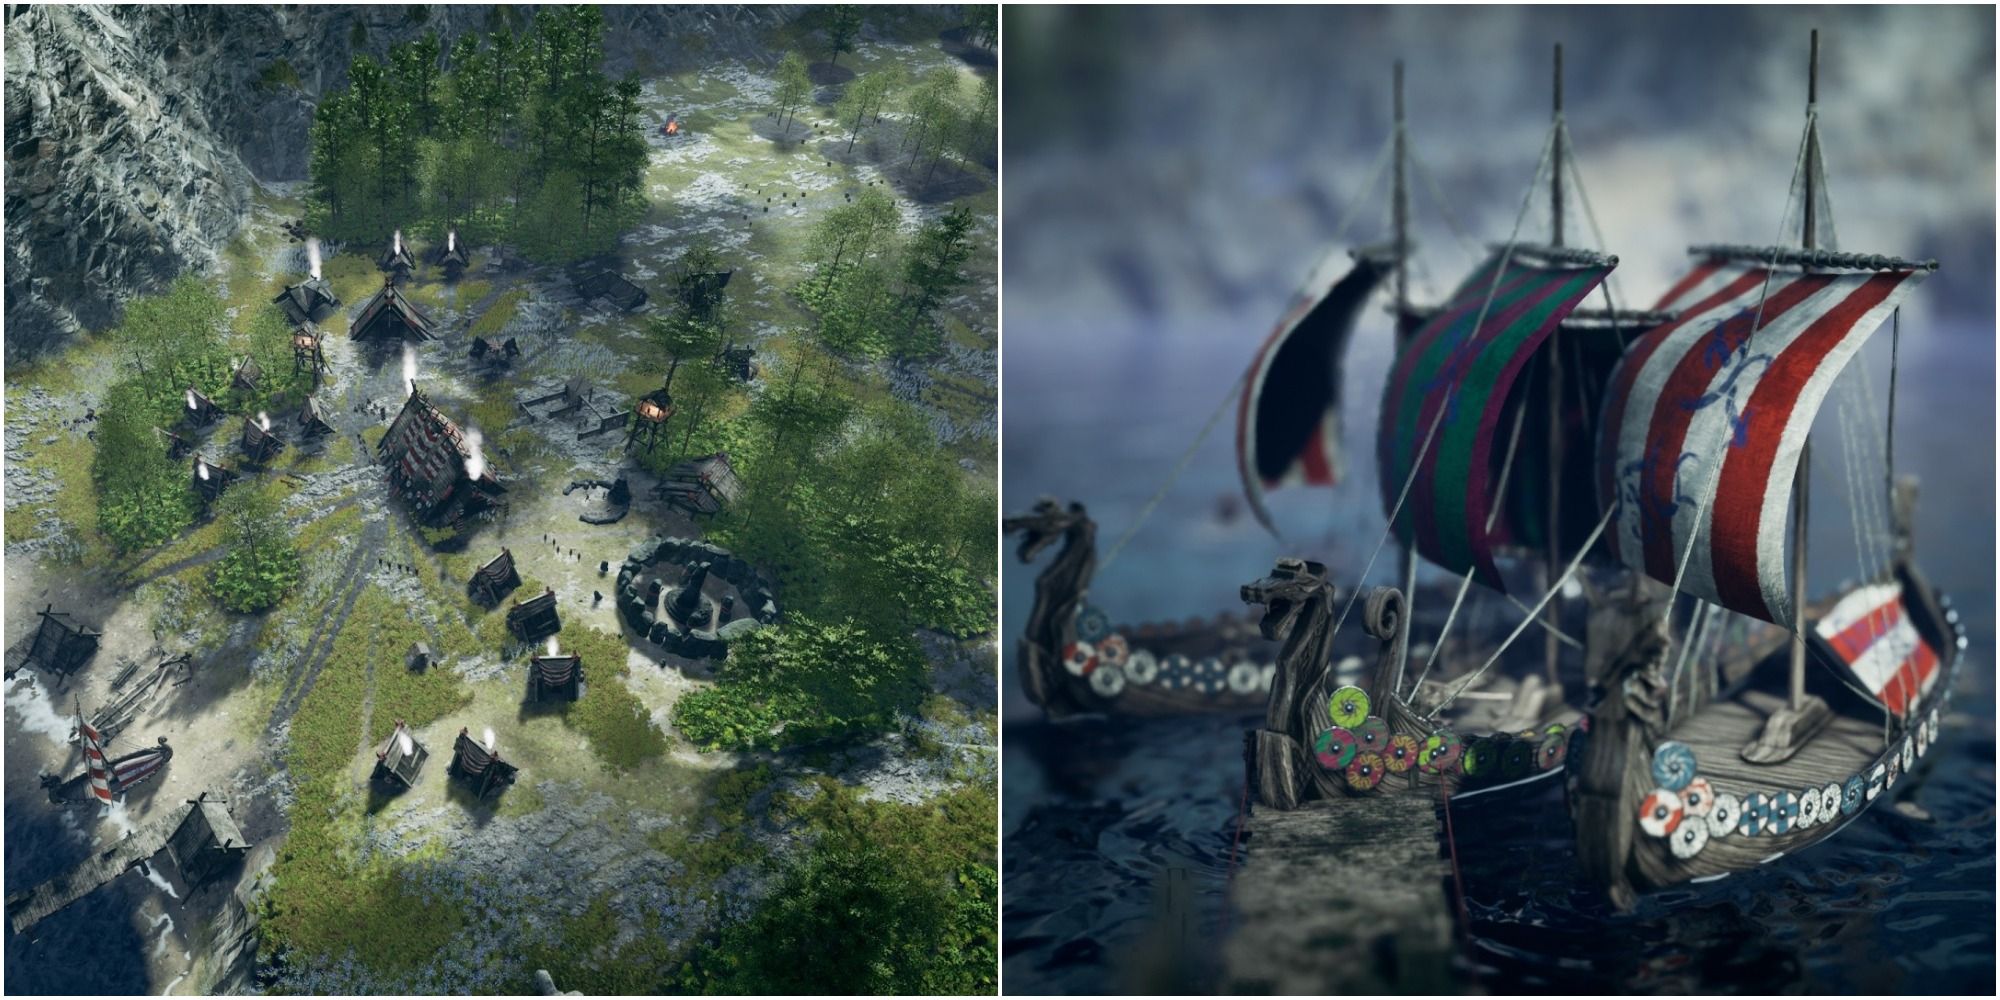 Frozenheim - collage of a forest village and some longboats